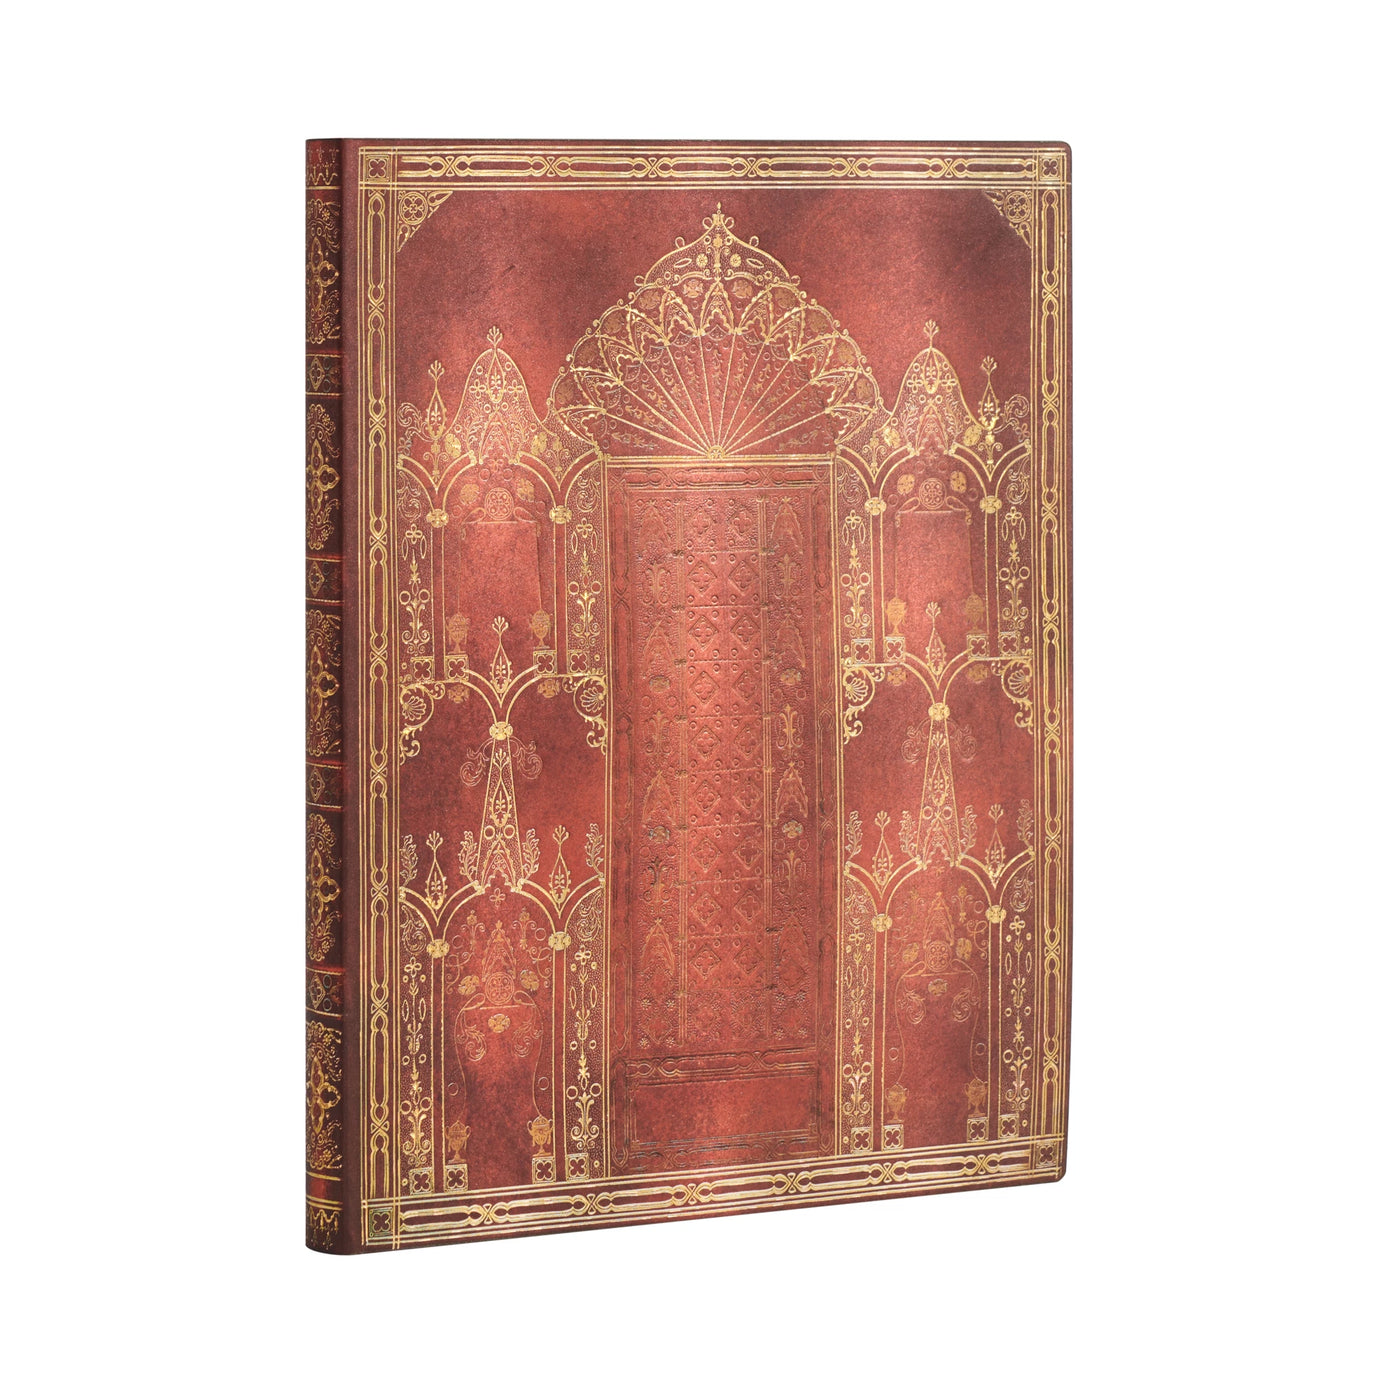 Paperblanks Flexis Isle of Ely, Gothic Revival Ultra Journal